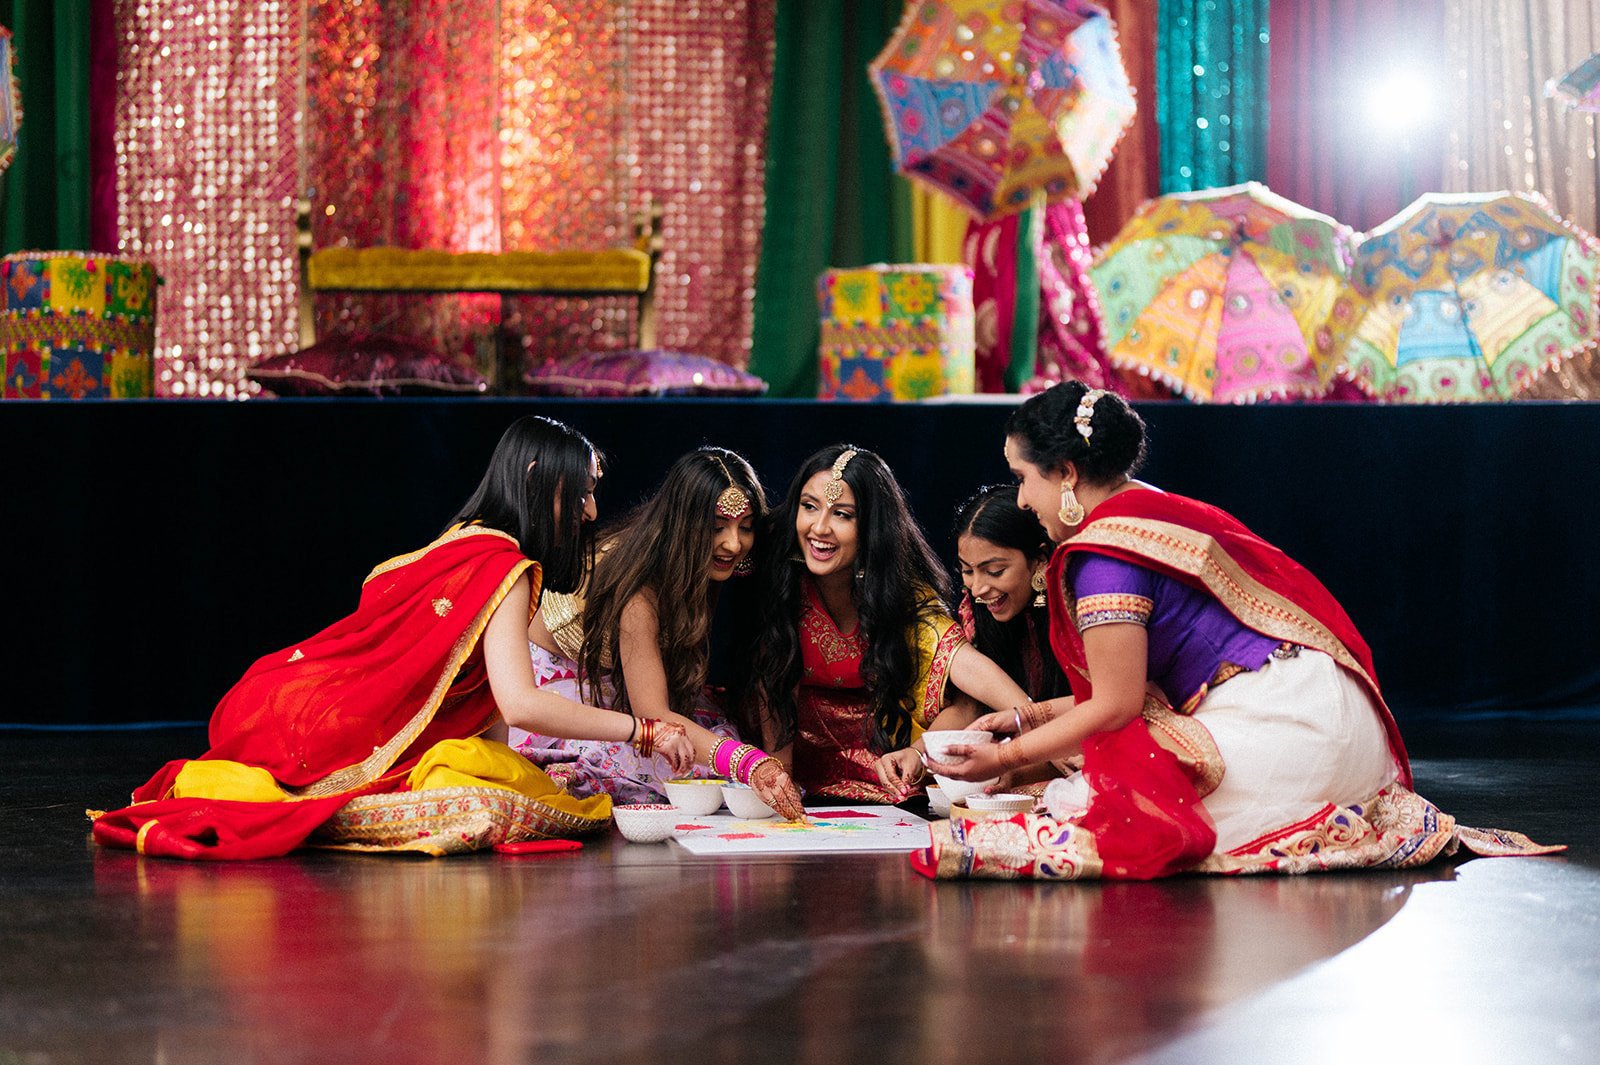 A group of women complete a rangoli board in front of vibrant colourful curtains.